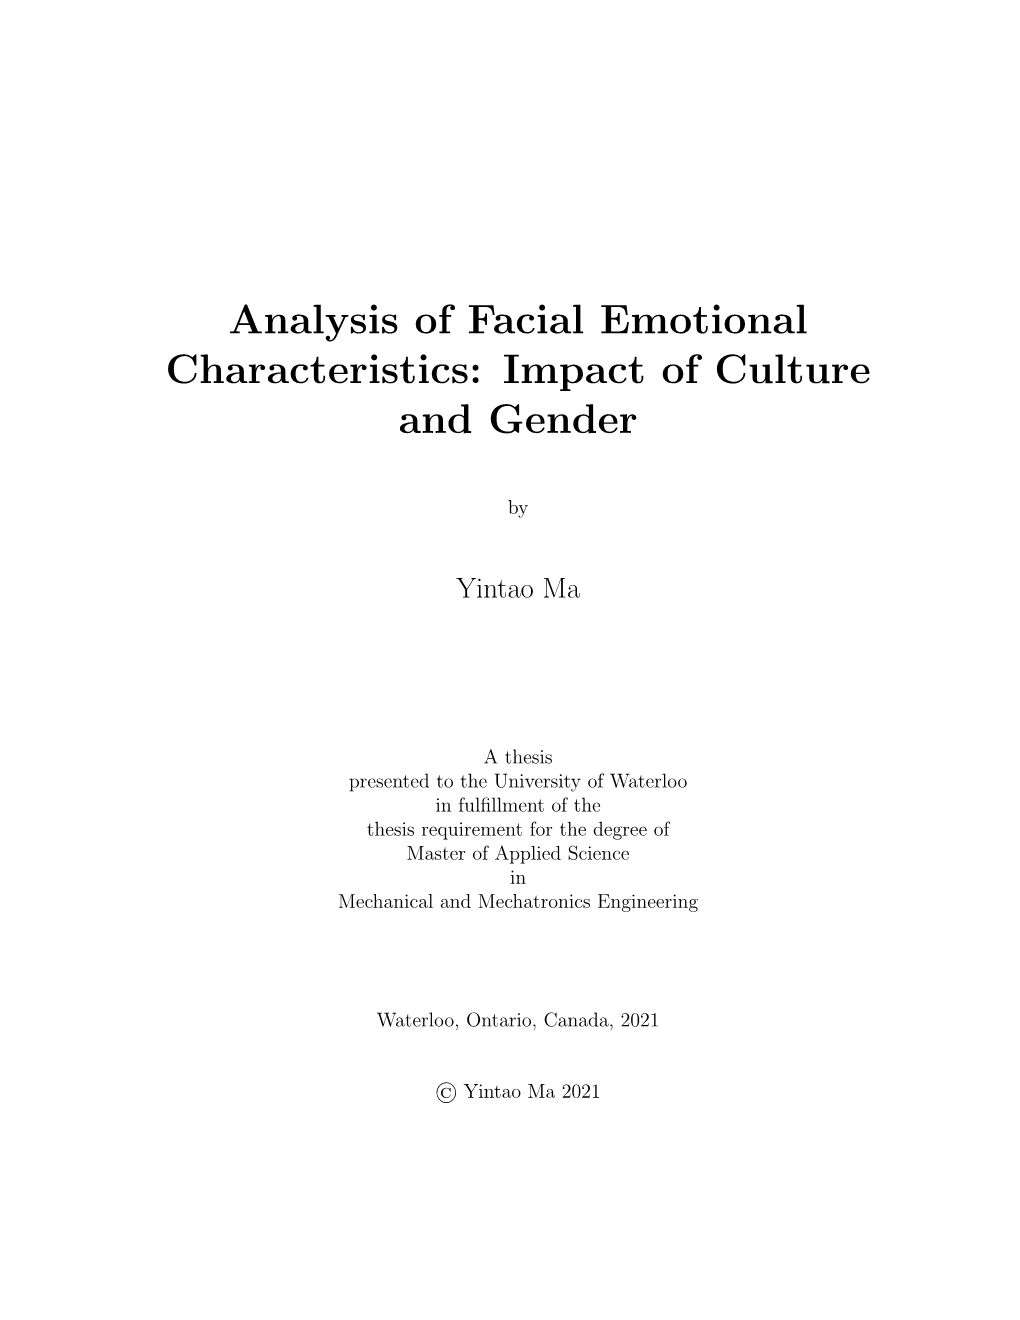 Analysis of Facial Emotional Characteristics: Impact of Culture and Gender